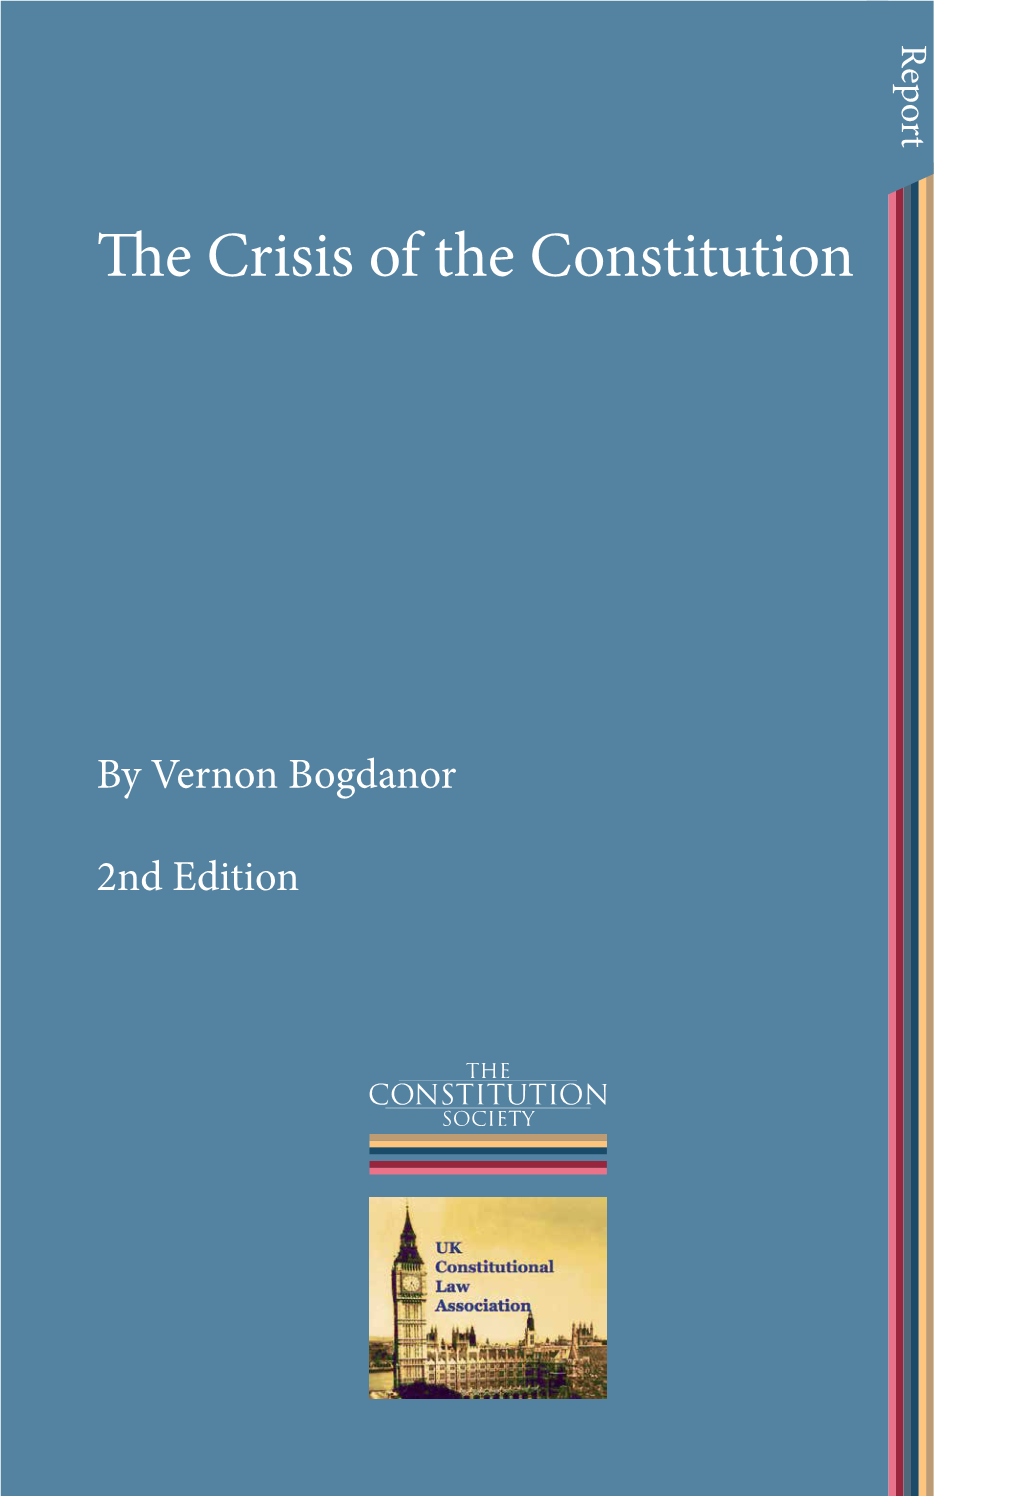 Download PDF on the Crisis of the Constitution